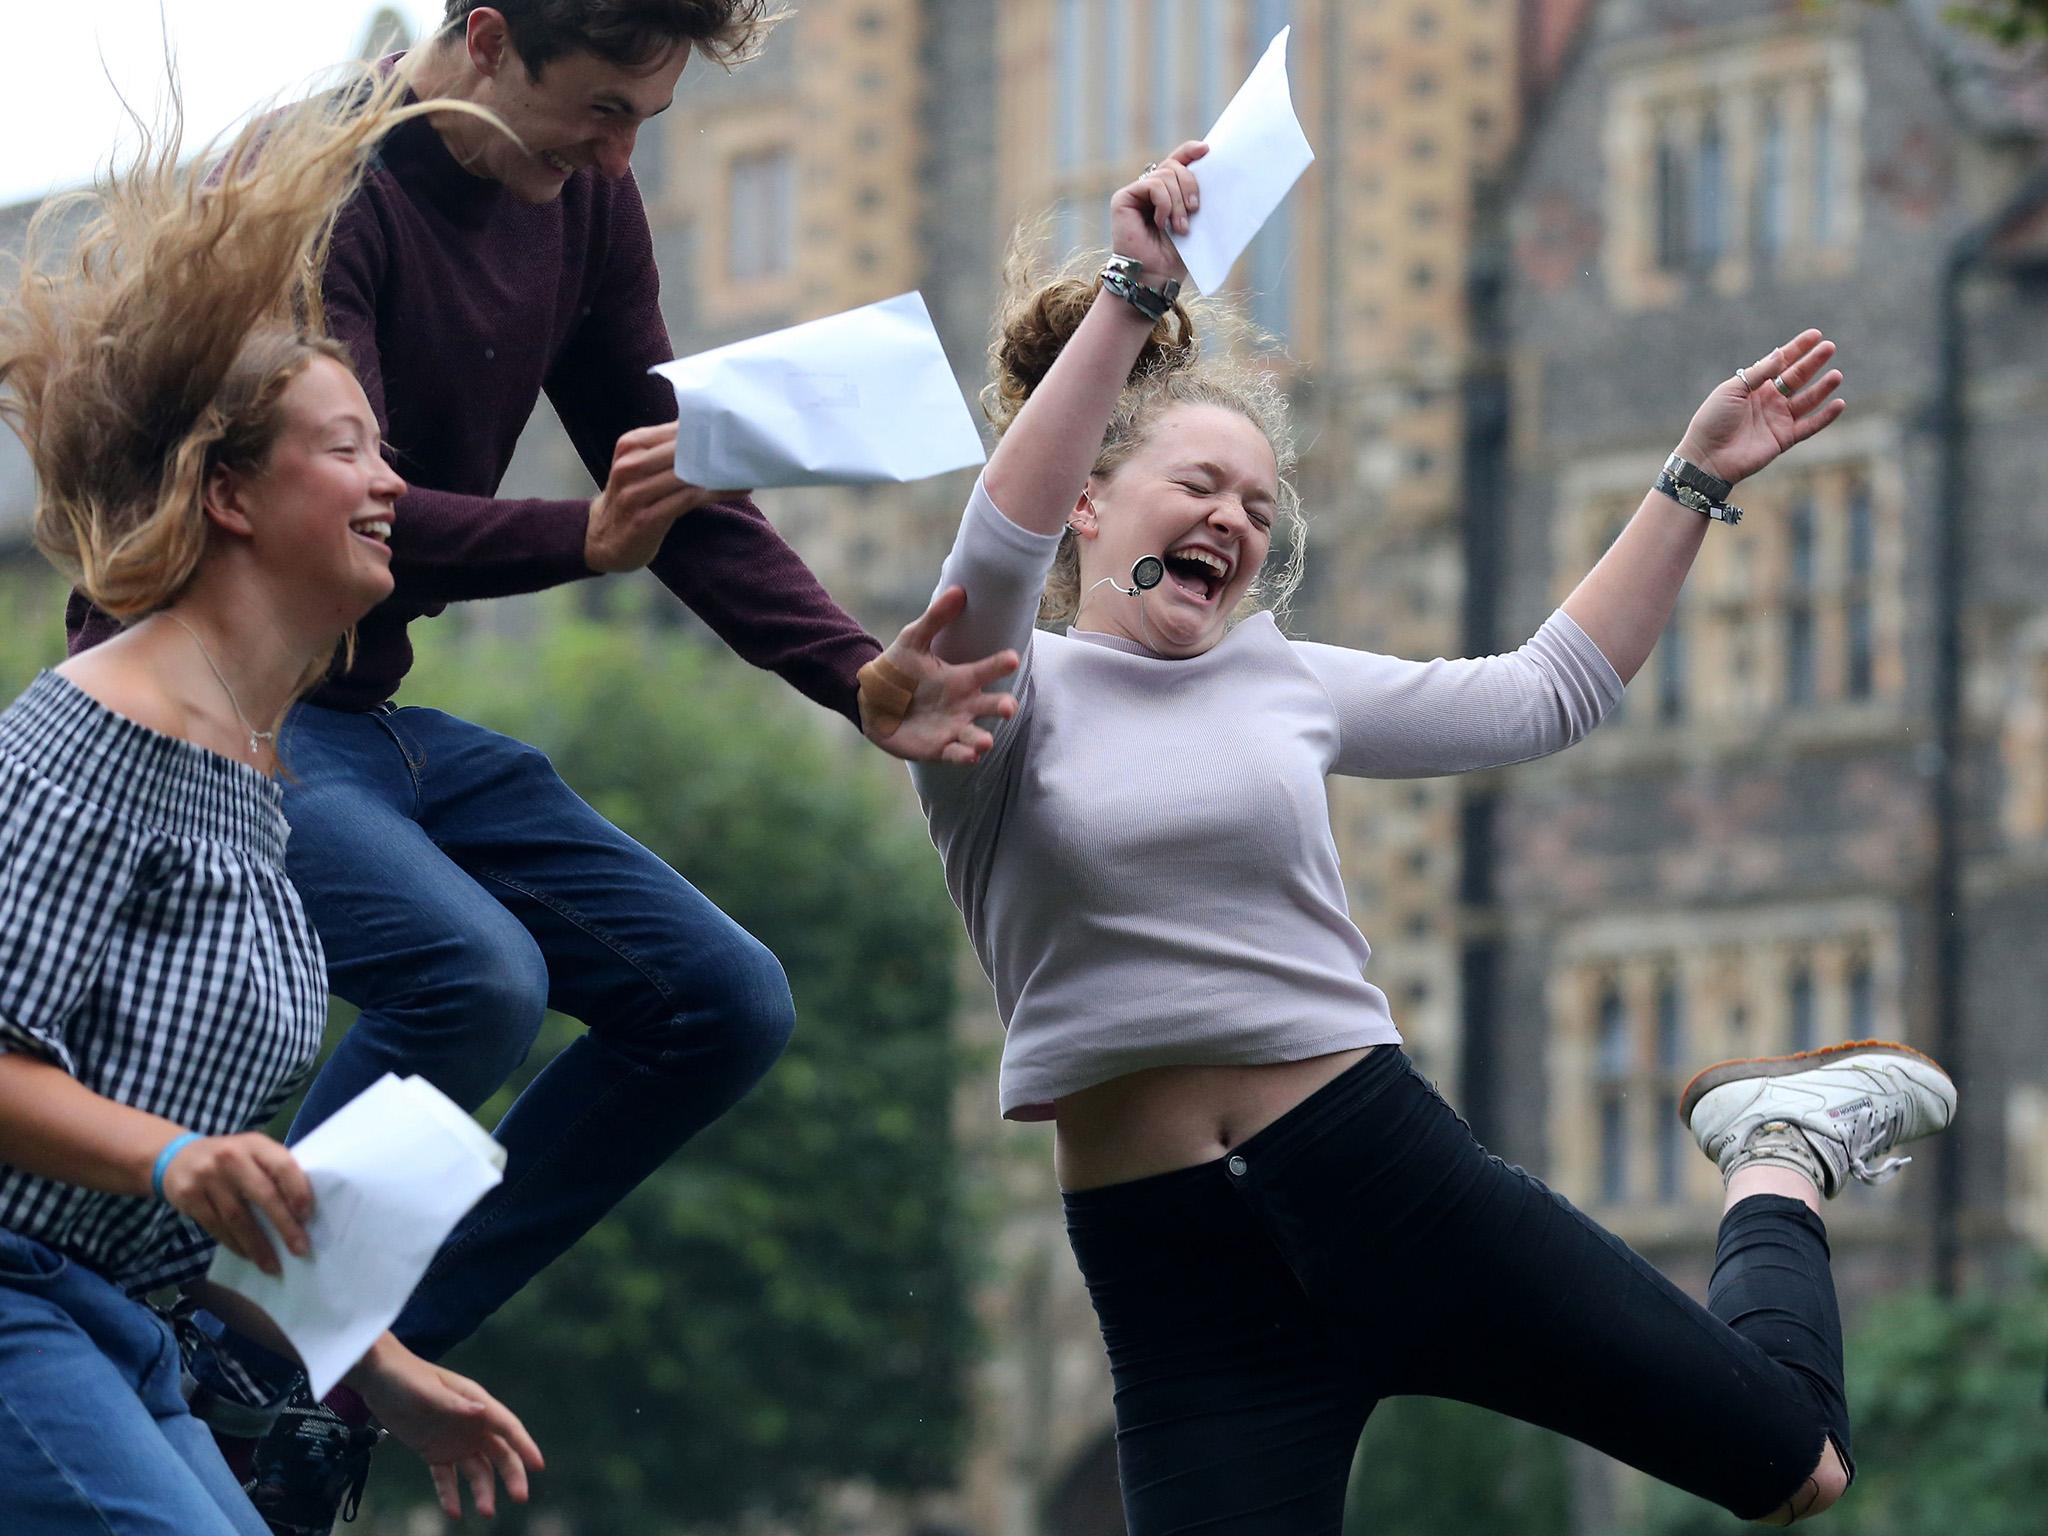 Students will receive their A-level results in August